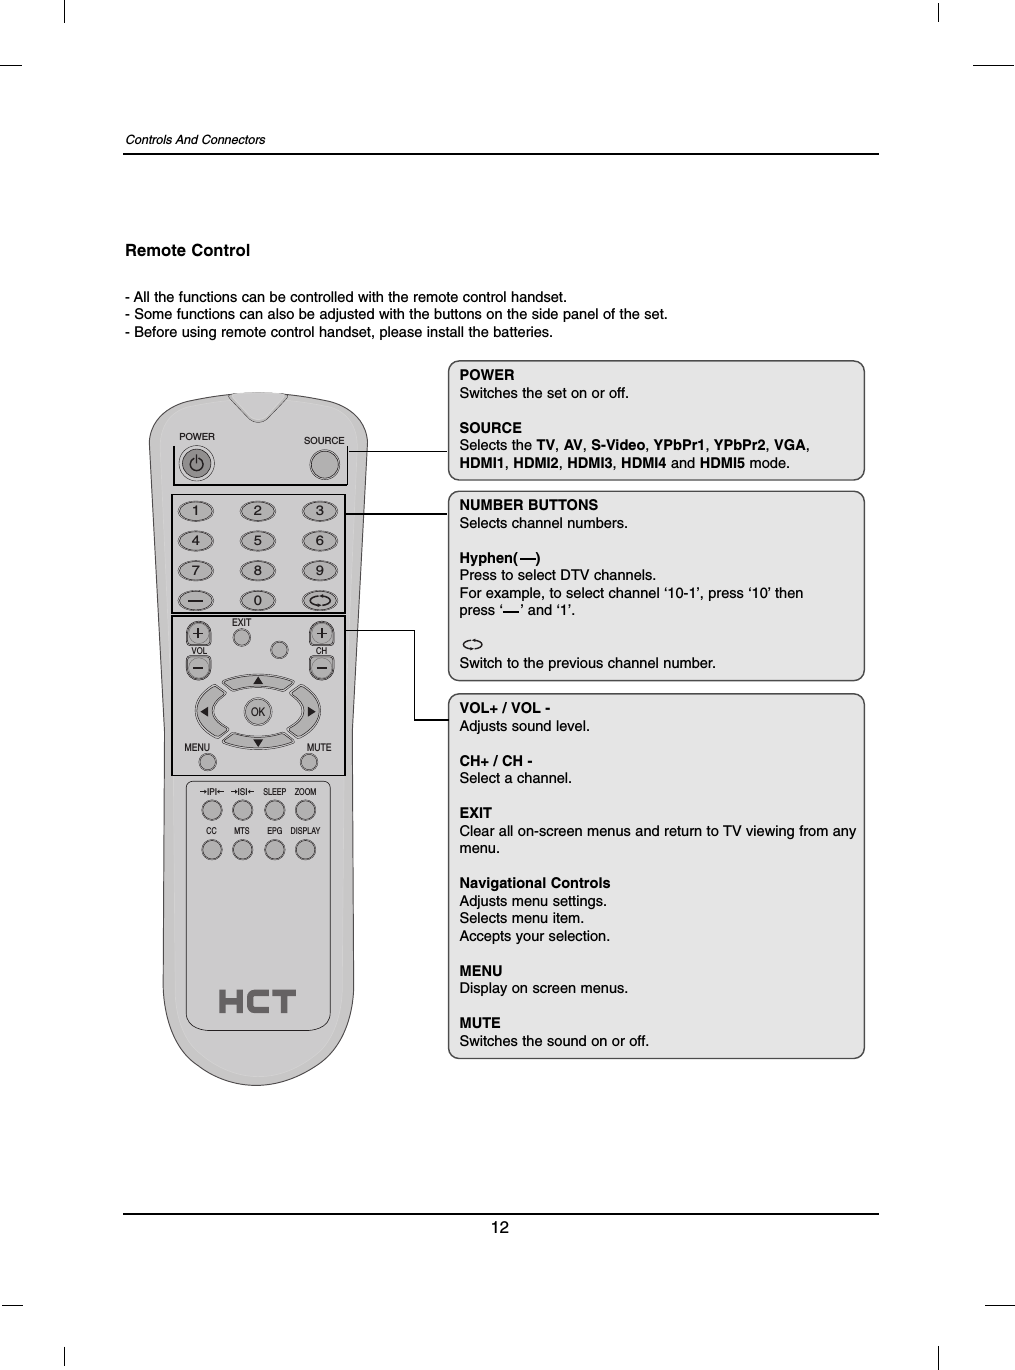 Controls And Connectors12- All the functions can be controlled with the remote control handset.- Some functions can also be adjusted with the buttons on the side panel of the set.- Before using remote control handset, please install the batteries.Remote Control1 2 34 5 67 8 90EXITVOL CHMENU MUTEOKSOURCEPOWERSLEEP ZOOMIPI ISIEPGMTSCC DISPLAYPOWERSwitches the set on or off.SOURCESelects the TV, AV,S-Video,YPbPr1,YPbPr2,VGA,HDMI1,HDMI2,HDMI3,HDMI4 and HDMI5 mode.NUMBER BUTTONSSelects channel numbers.Hyphen(    )Press to select DTV channels.For example, to select channel ‘10-1’, press ‘10’ then press ‘    ’ and ‘1’.Switch to the previous channel number.VOL+ / VOL -Adjusts sound level.CH+ / CH -Select a channel.EXITClear all on-screen menus and return to TV viewing from anymenu.Navigational ControlsAdjusts menu settings.Selects menu item.Accepts your selection.MENUDisplay on screen menus.MUTESwitches the sound on or off.